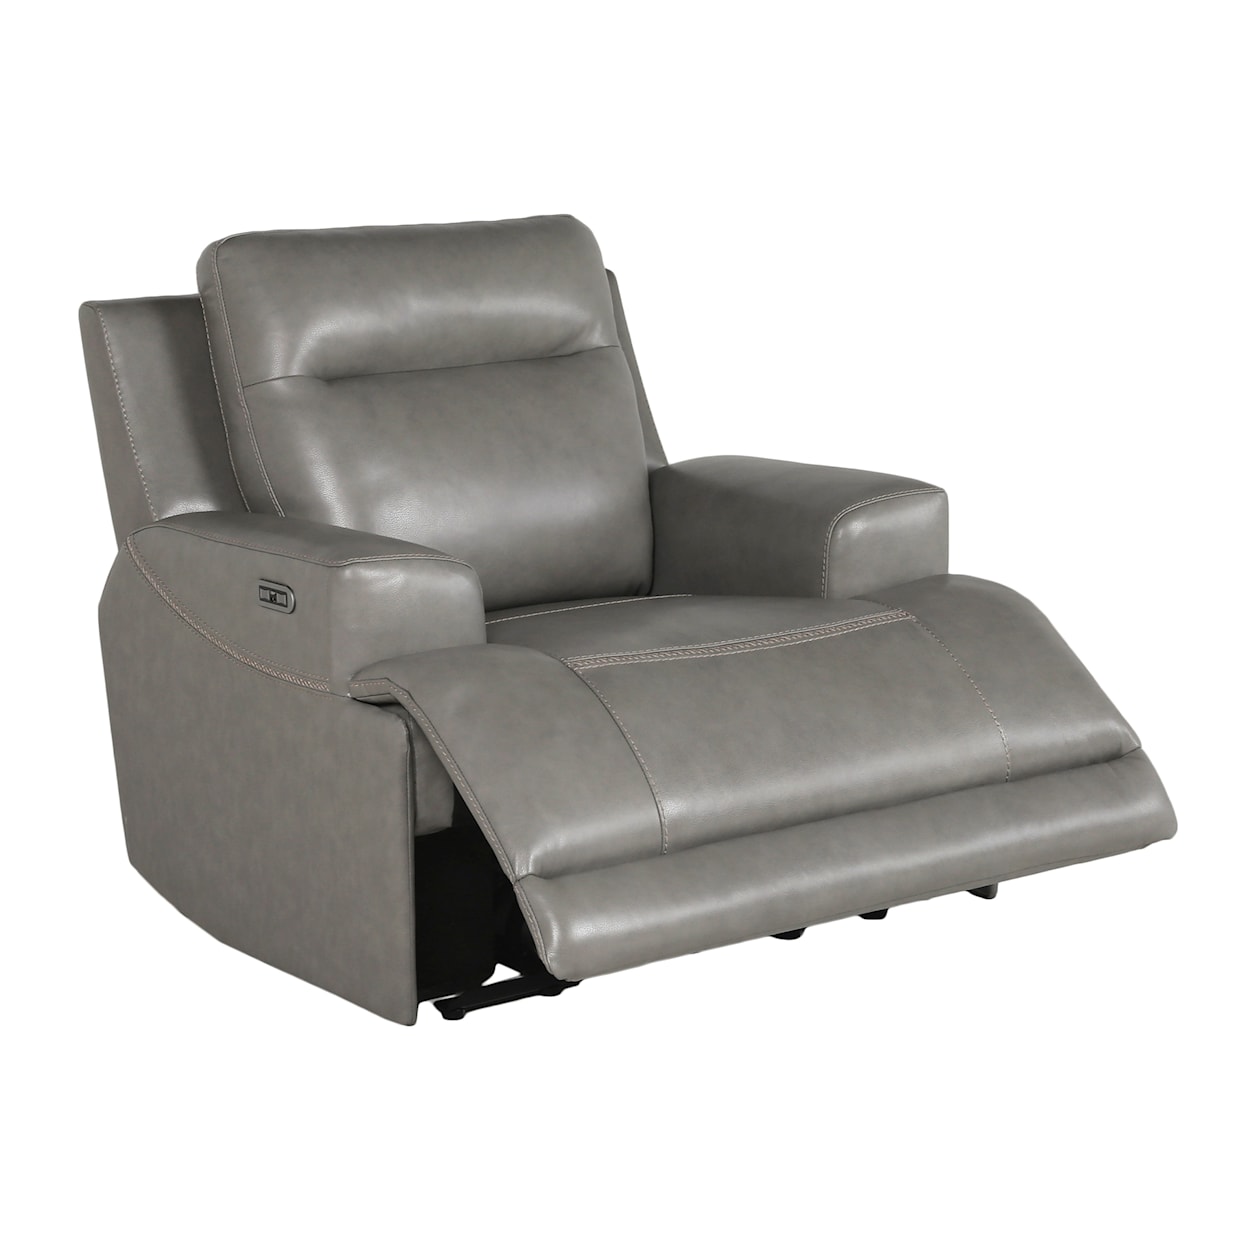 Signature Design by Ashley Goal Keeper Power Recliner